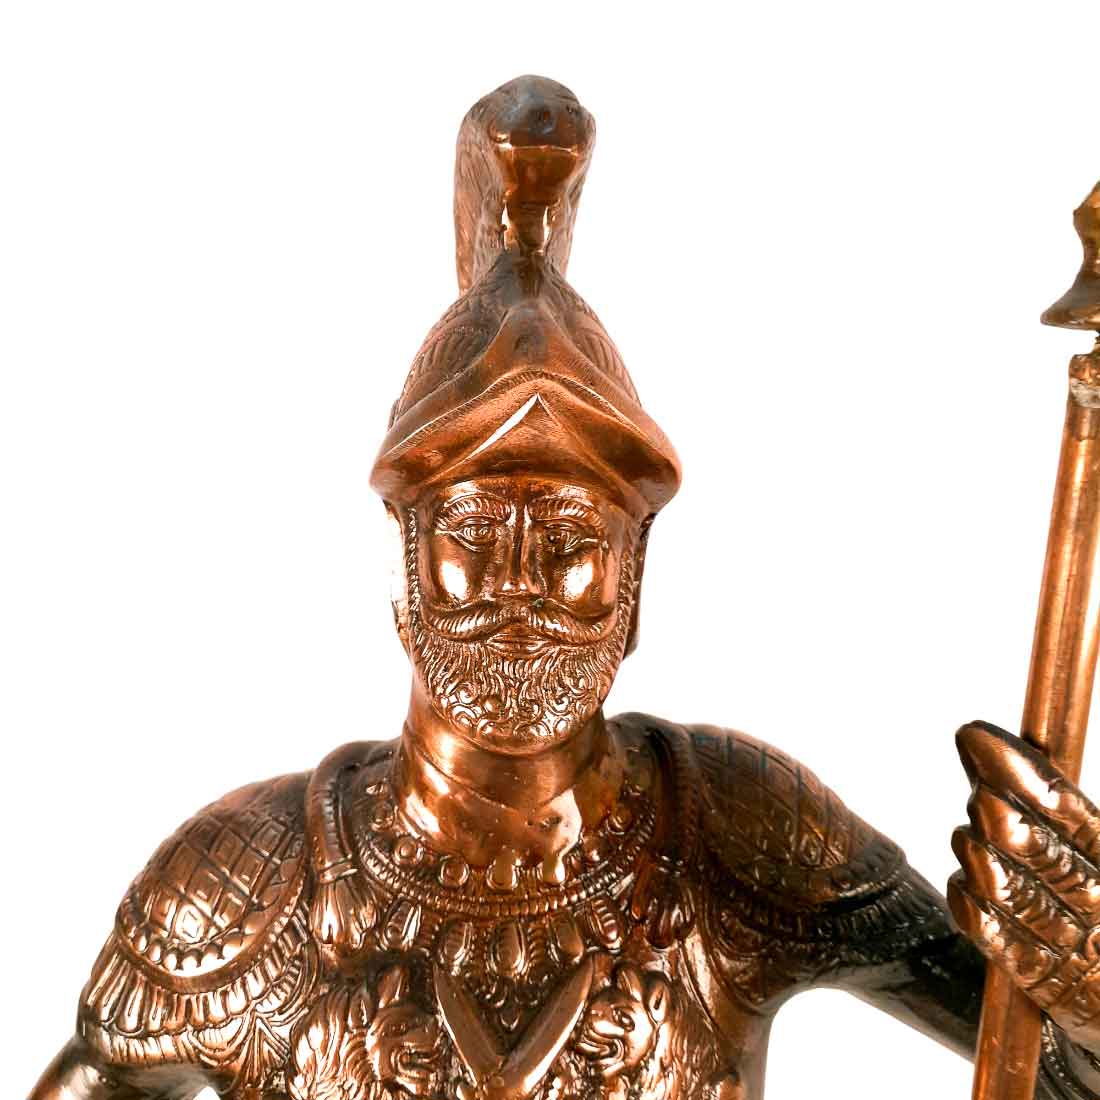 Soldier Showpiece | Warrior Statue with Spear & Sword - For Living Room, Home Decor & Gifts - 46 Inch - Apkamart